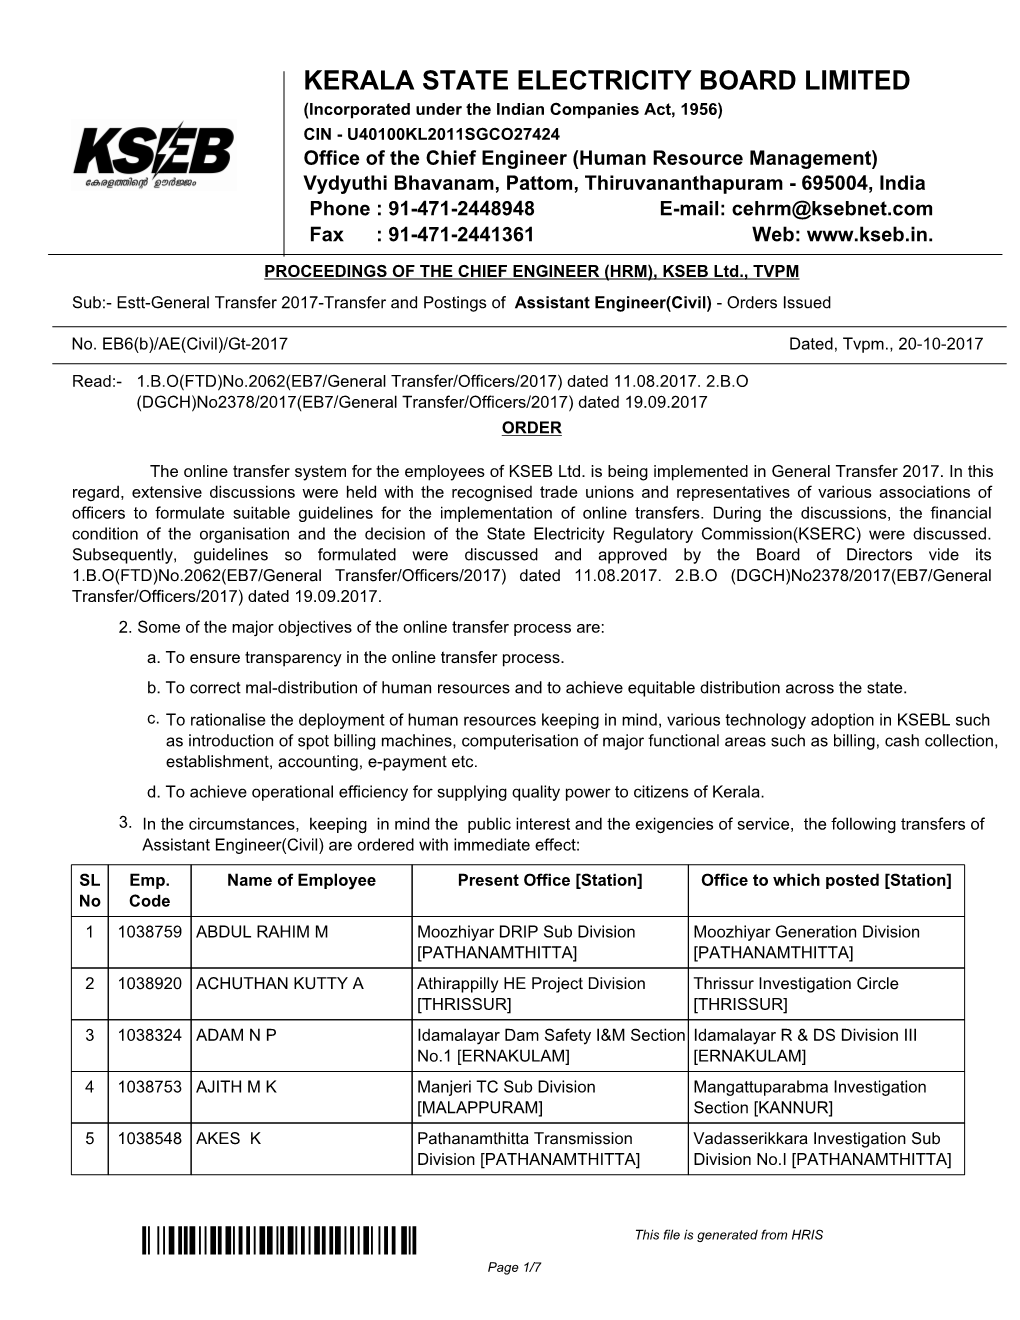 List of Assistant Engineer(Civil) Included in Transfer Order